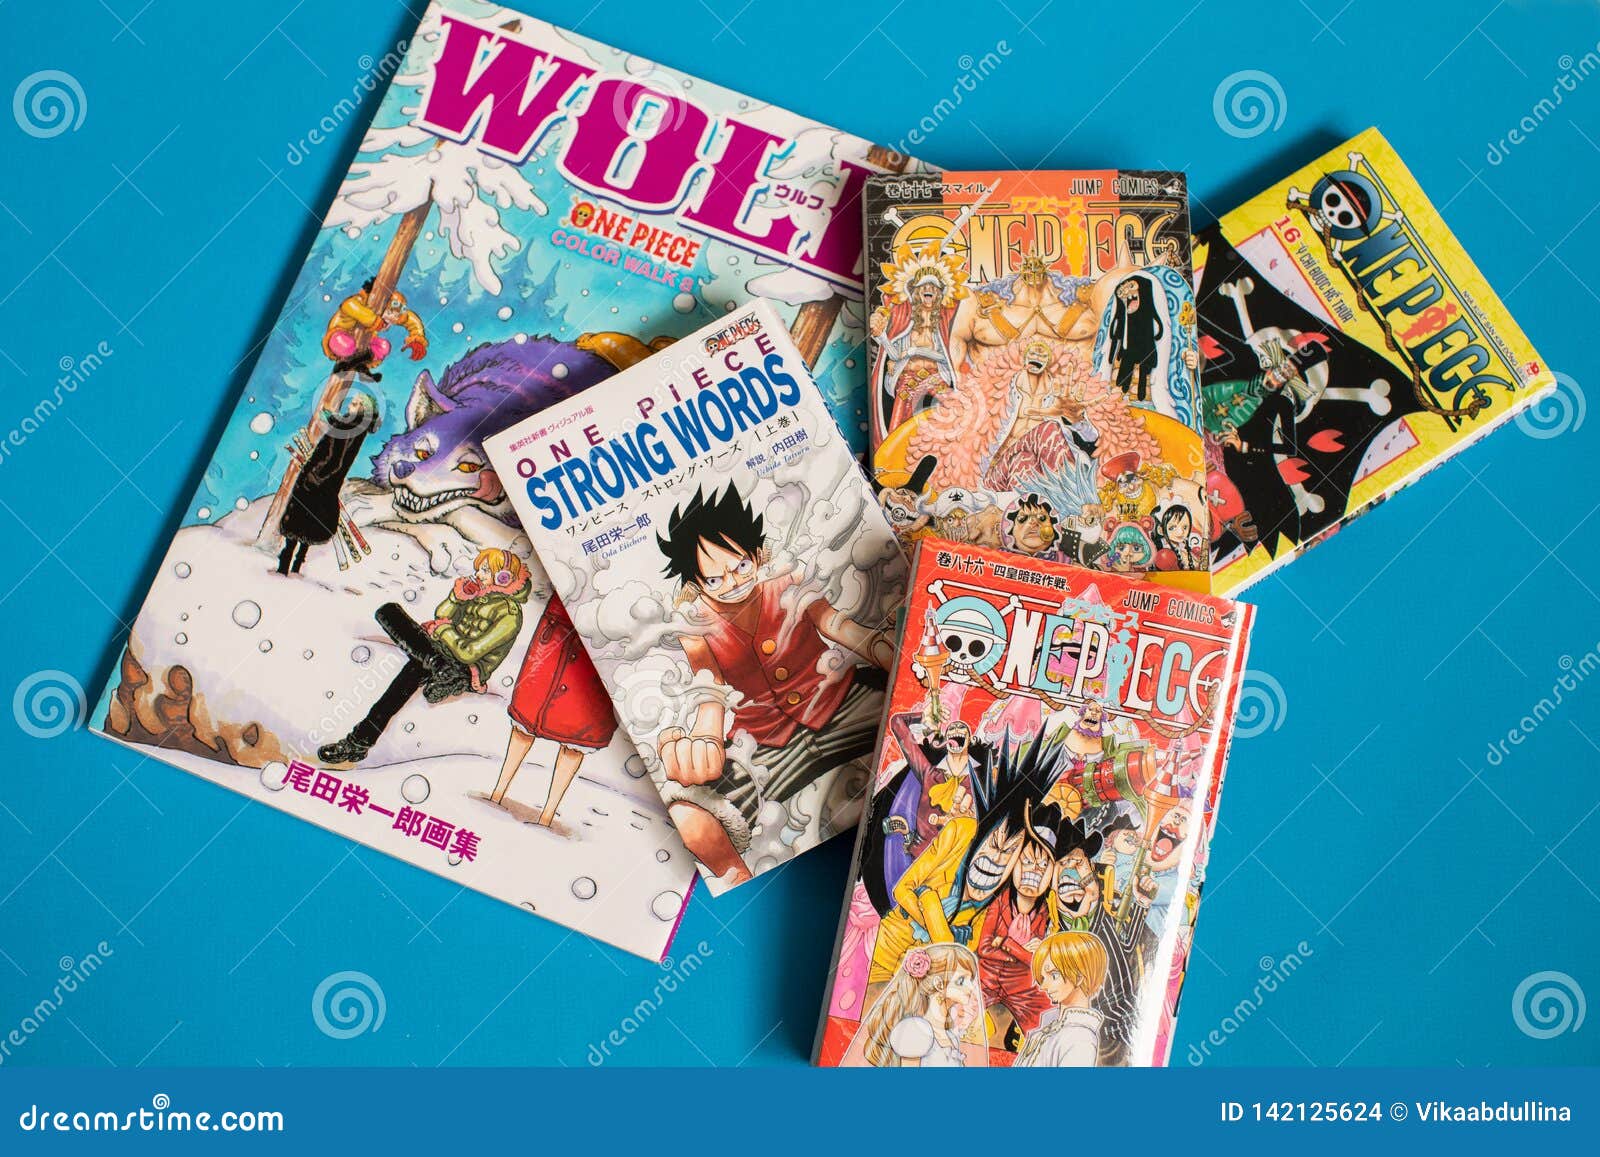 Japanese Manga One Piece - Comic Book Published in Weekly Shonen Jump  Magazine Editorial Stock Image - Image of collection, shueisha: 142125624